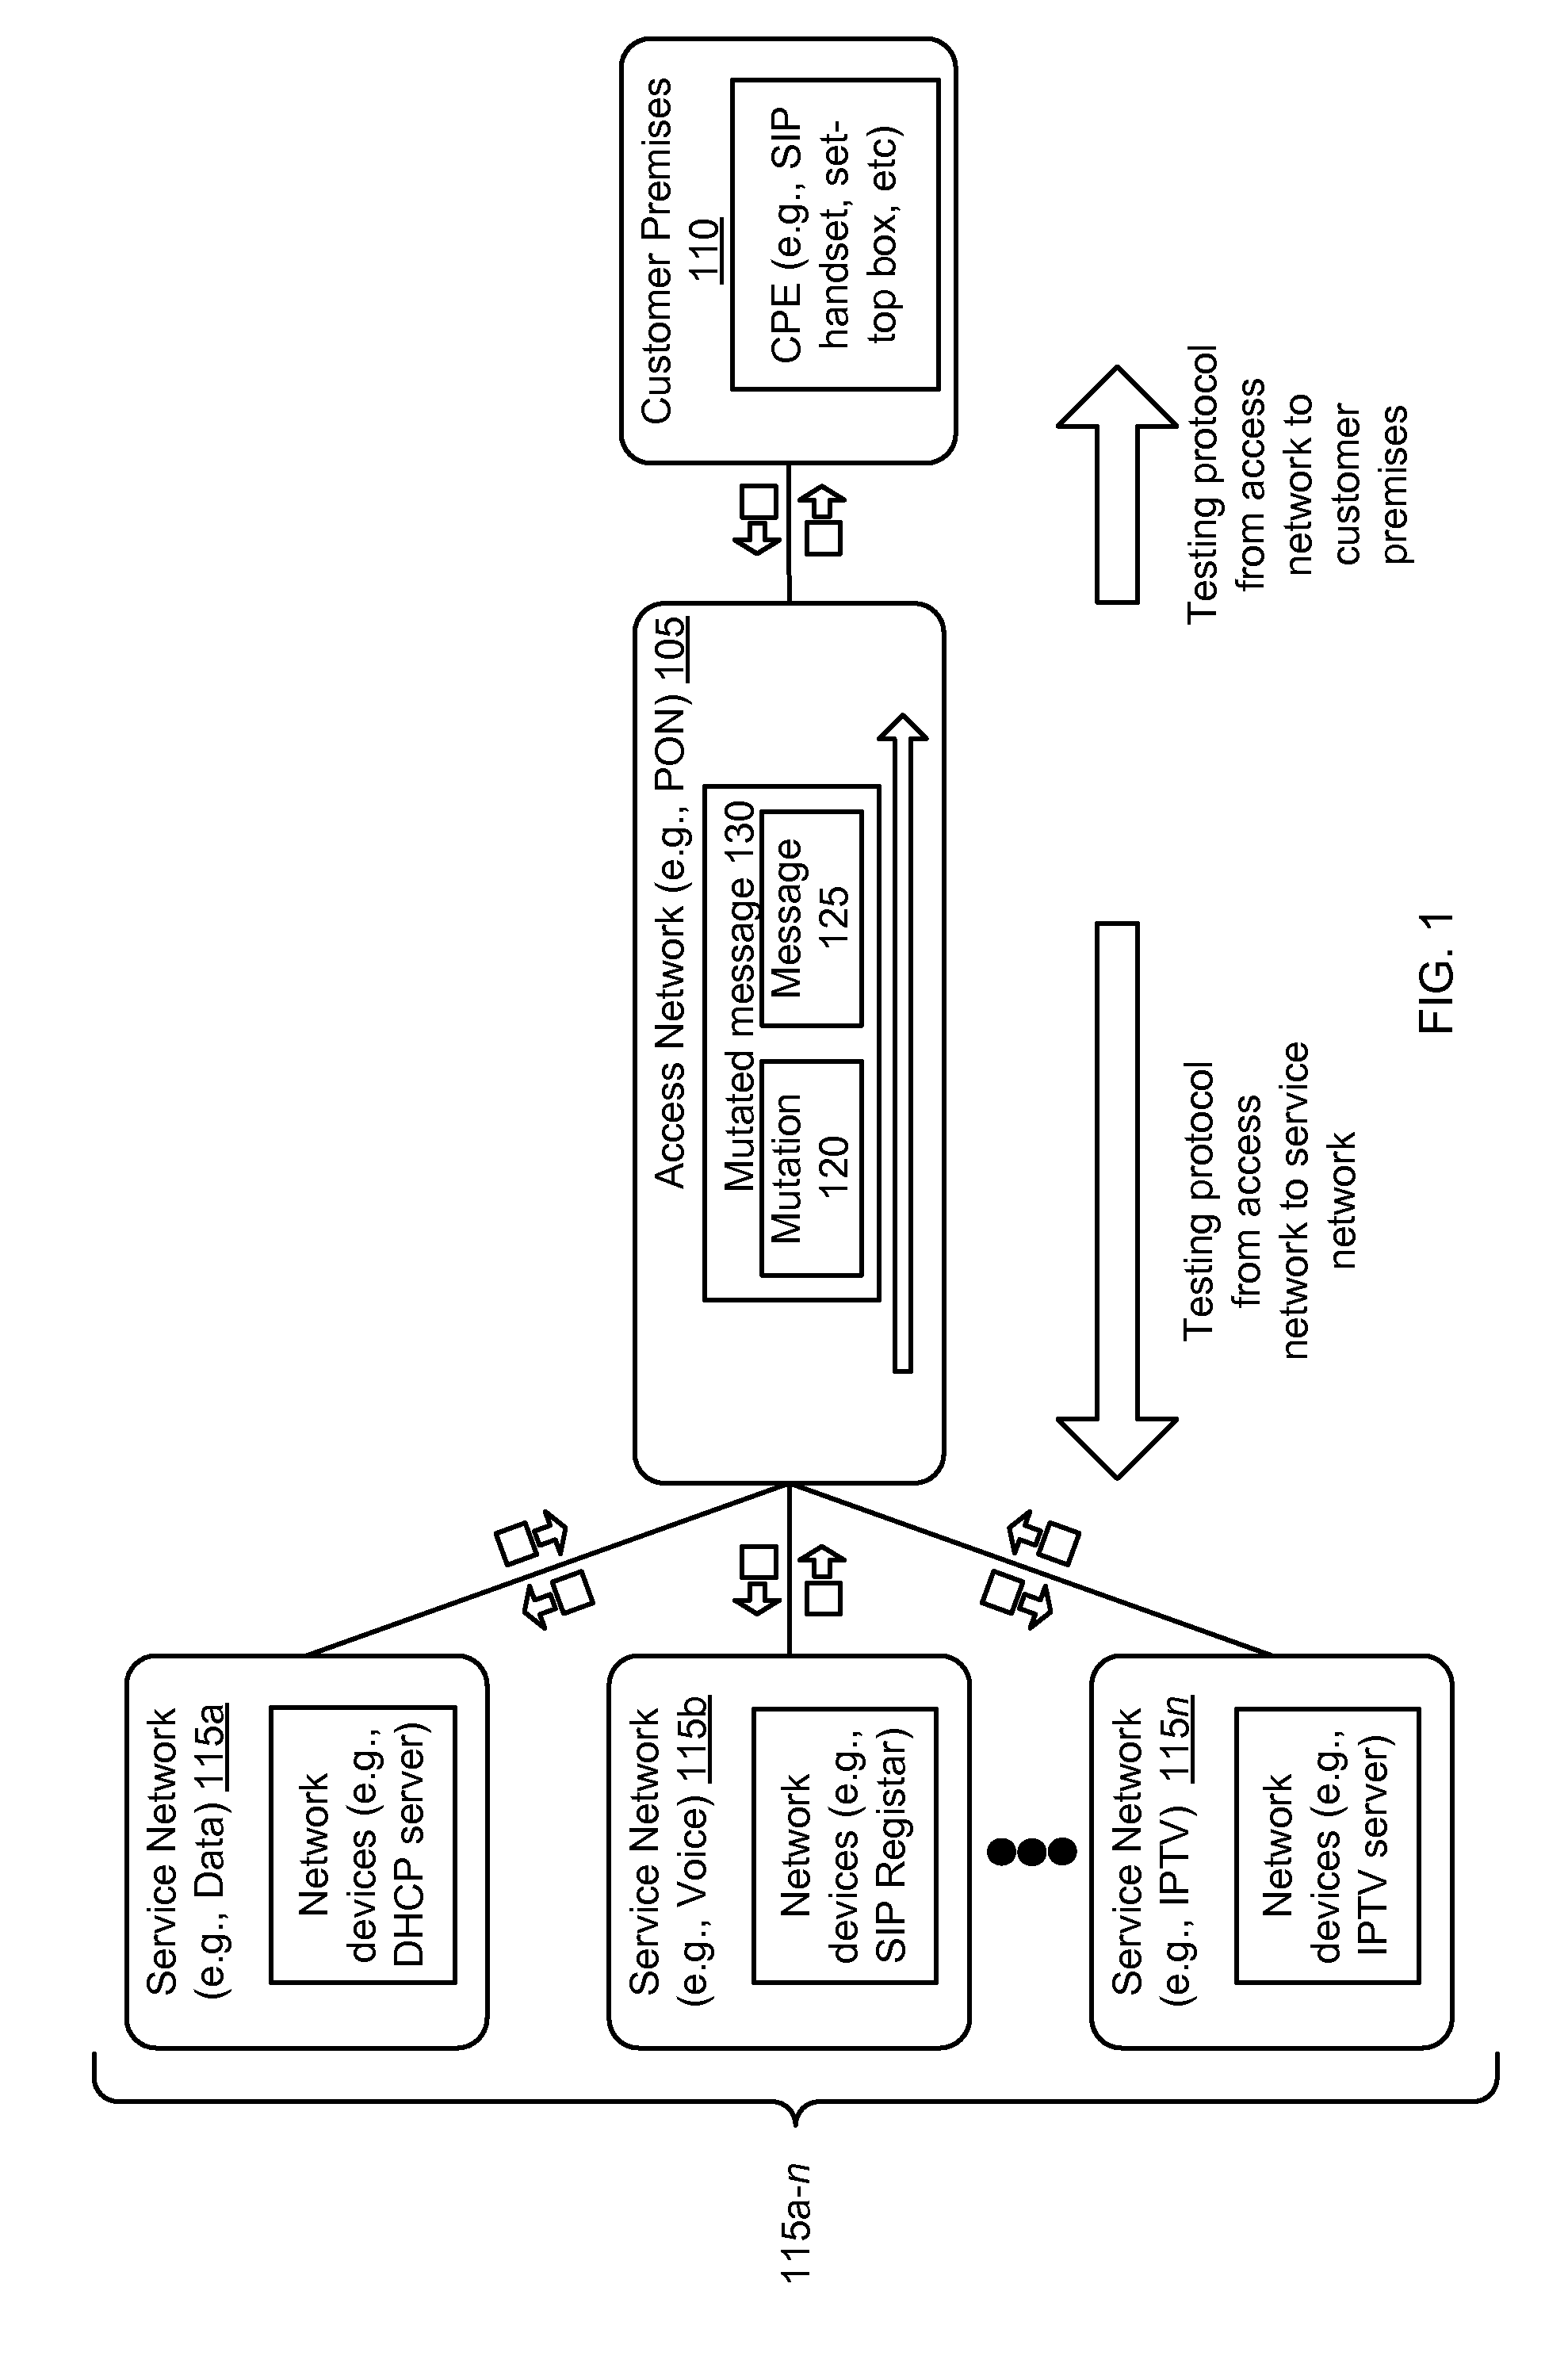 Method and apparatus to perform security and vulnerability testing of protocols